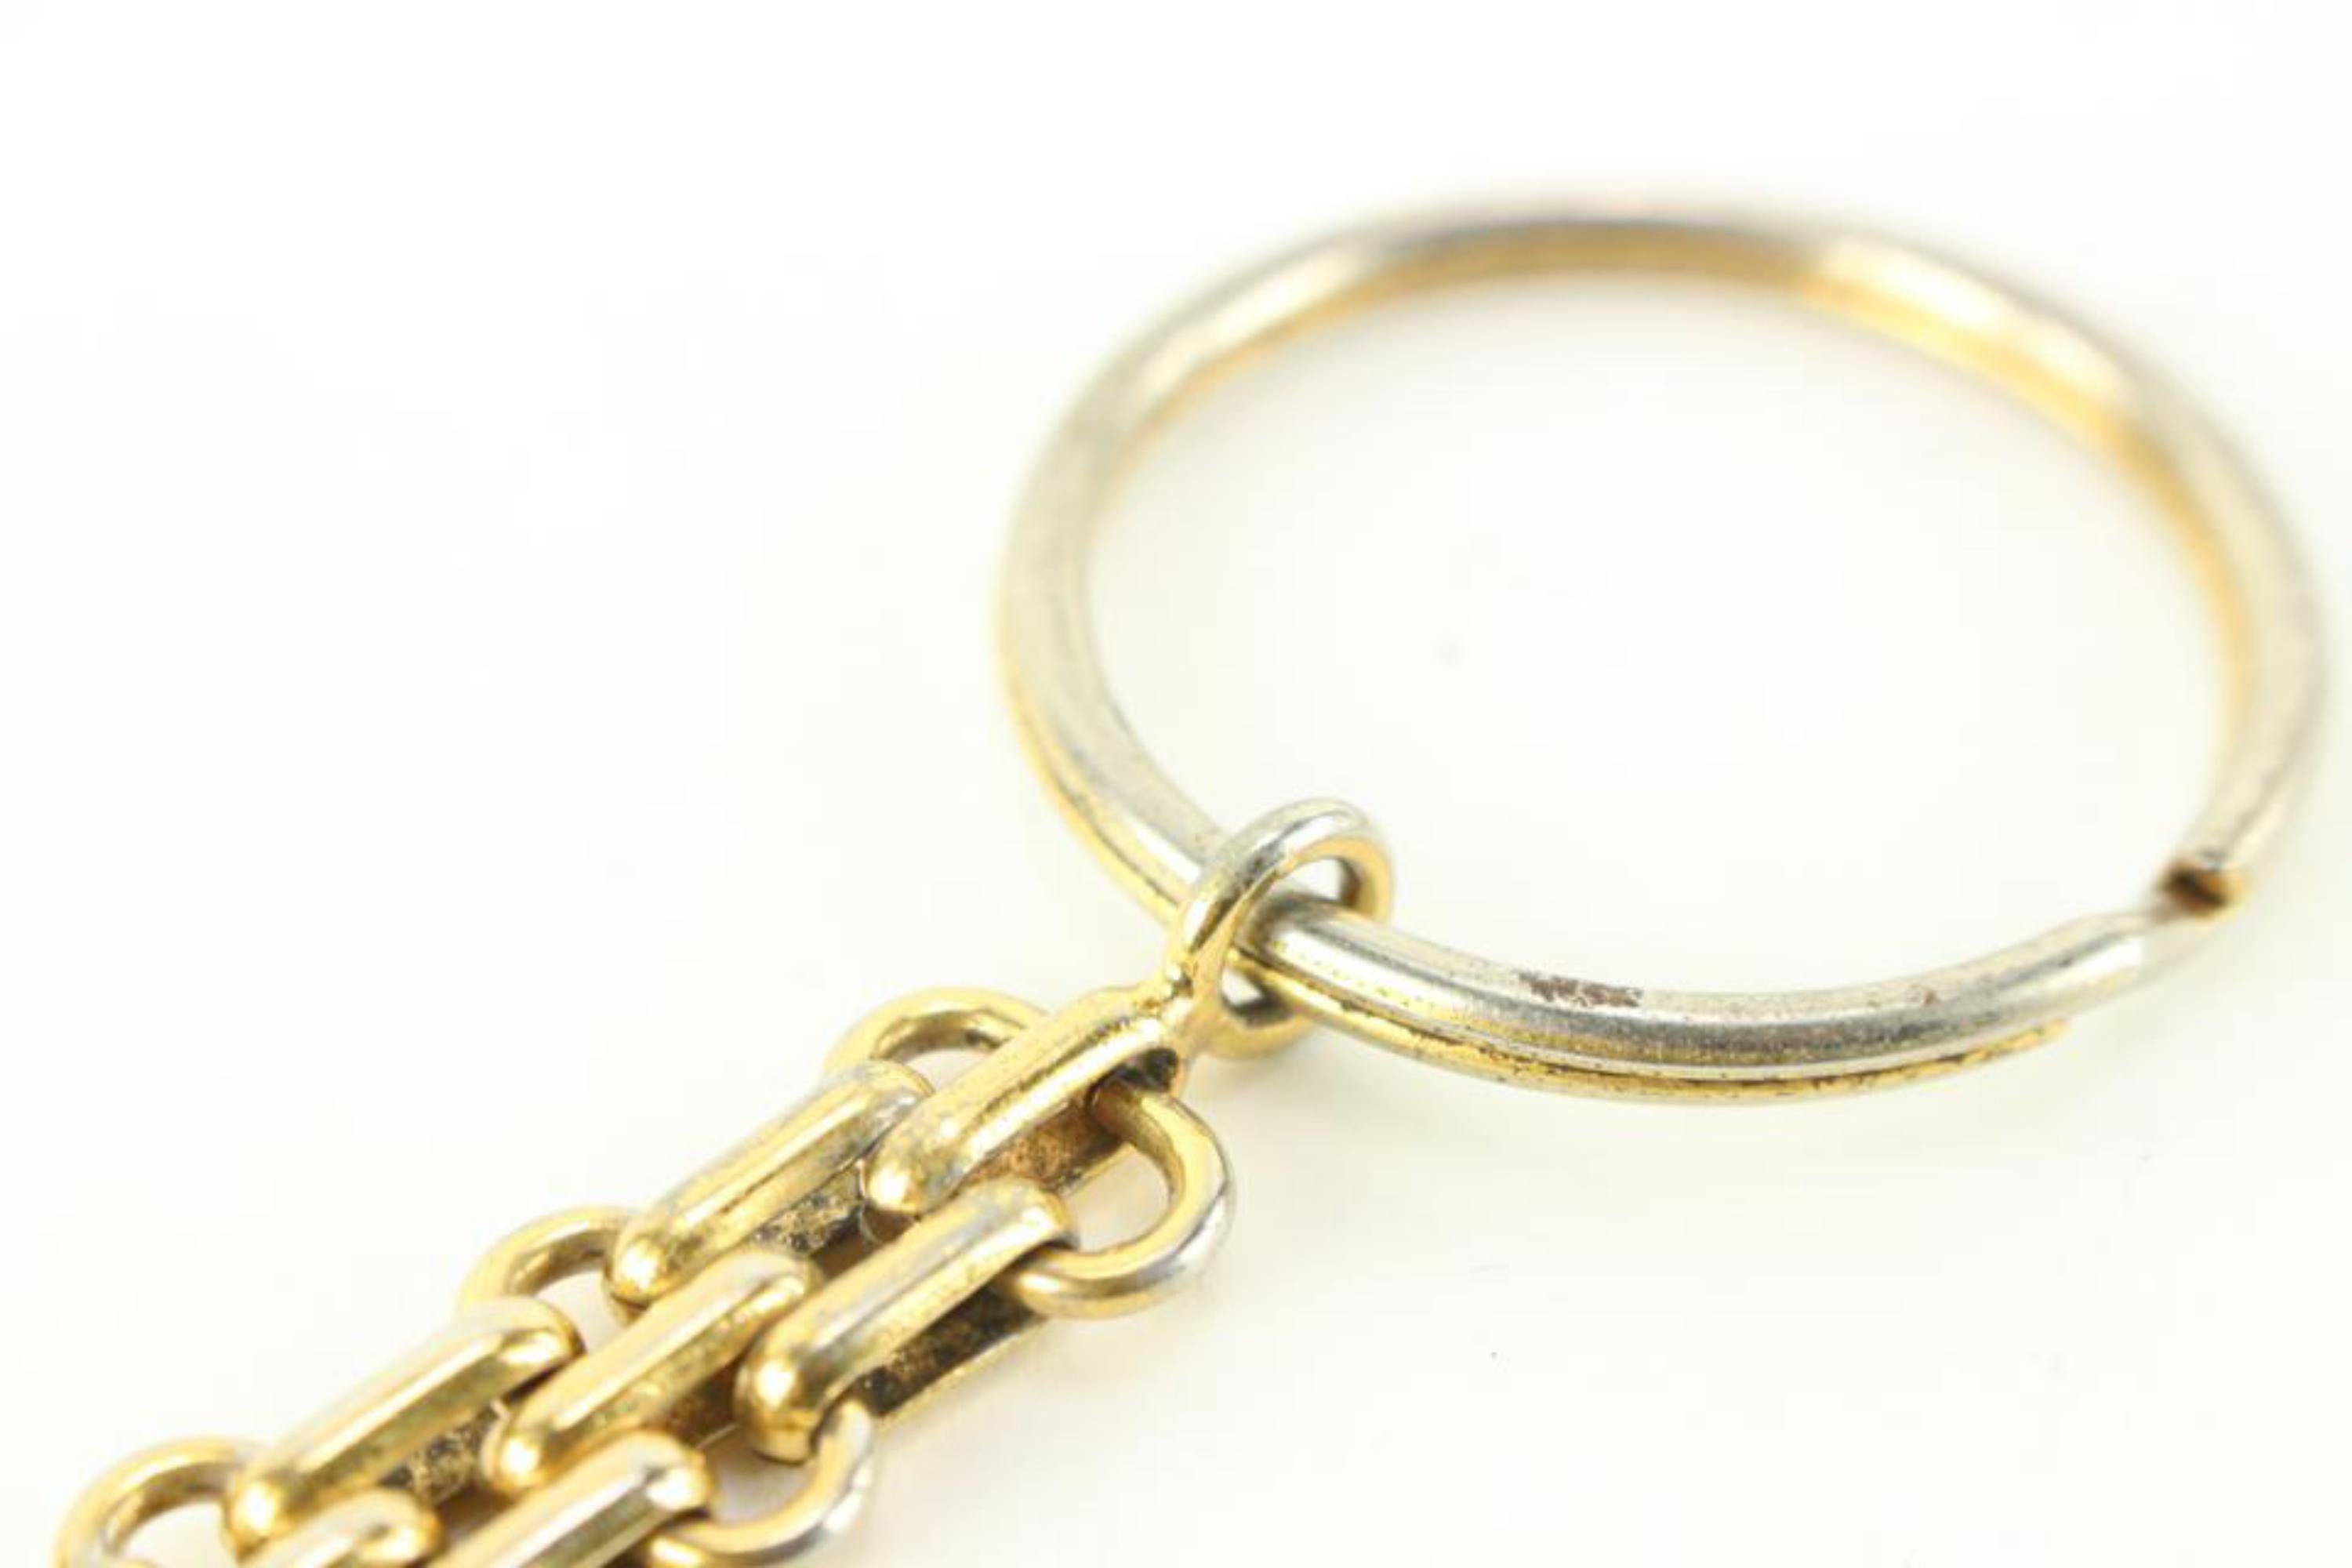 Women's or Men's Chanel Vintage Gold Plated Rue Cambon CC Keychain Bag Charm Pendant 81ca711s